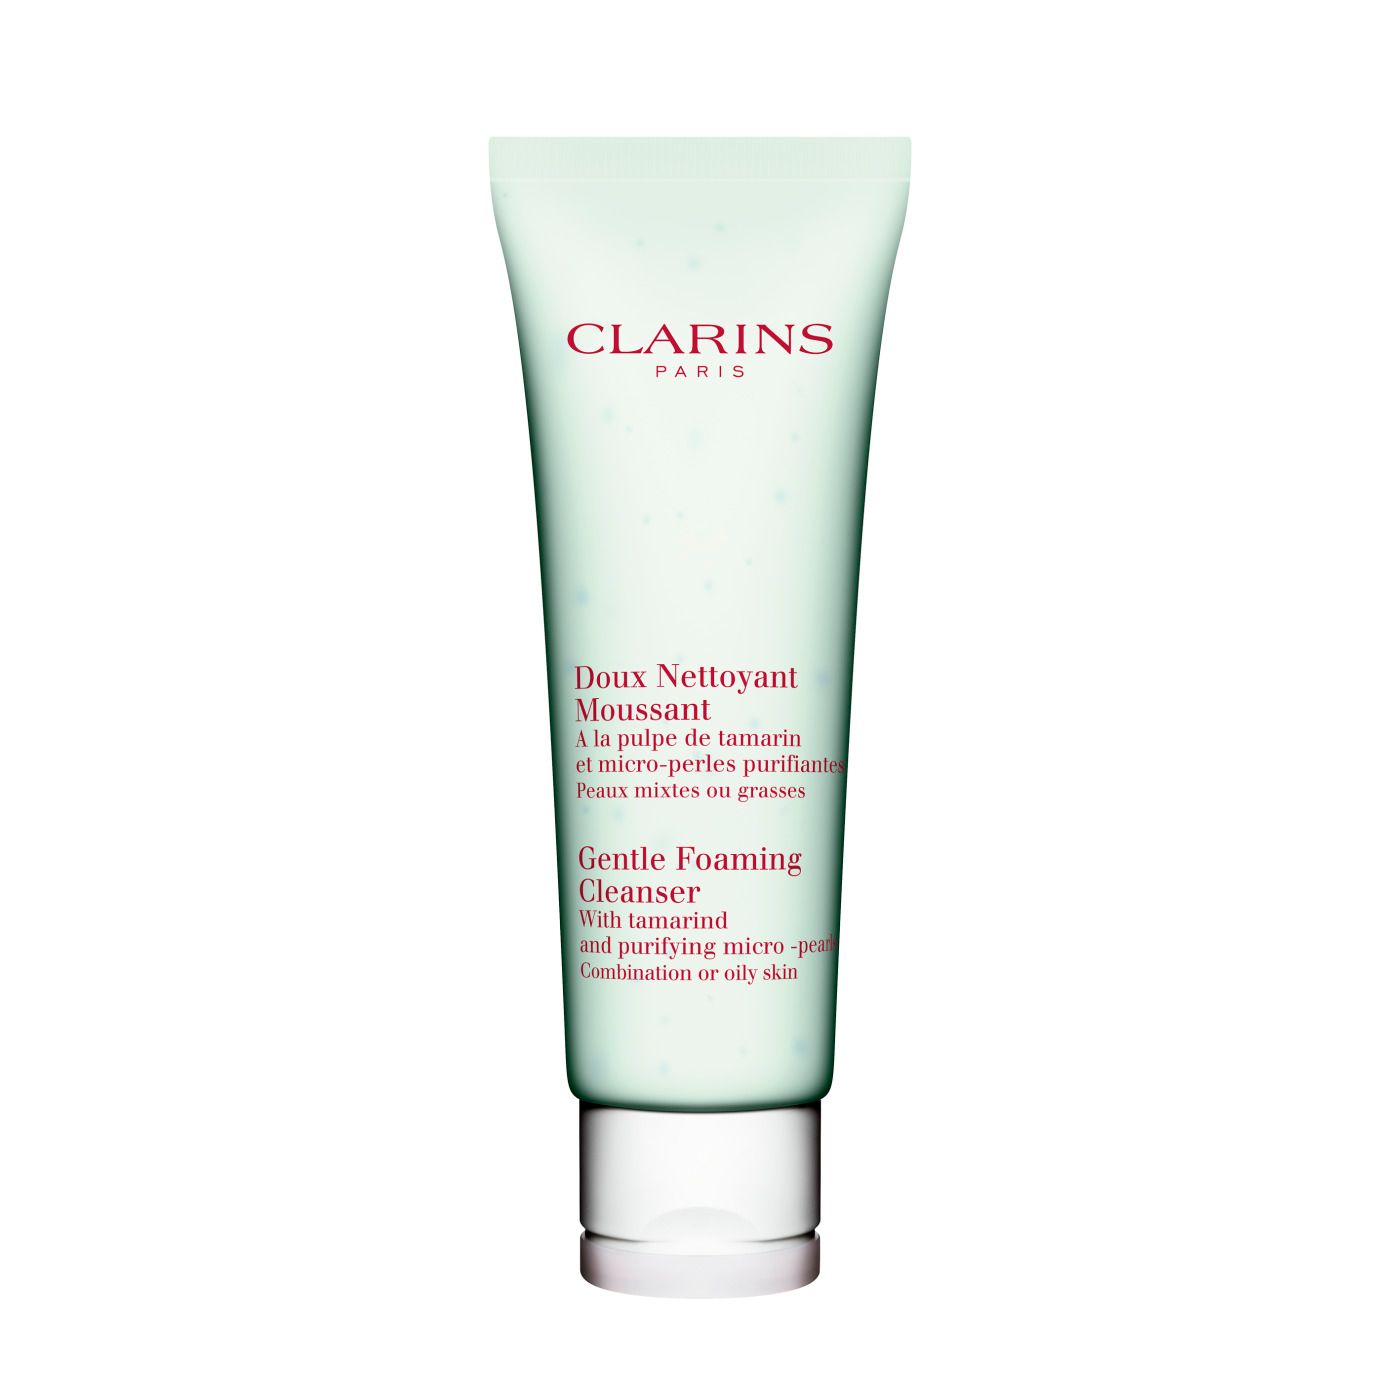 Clarins Foaming Cleanser Combination/Oily Skin